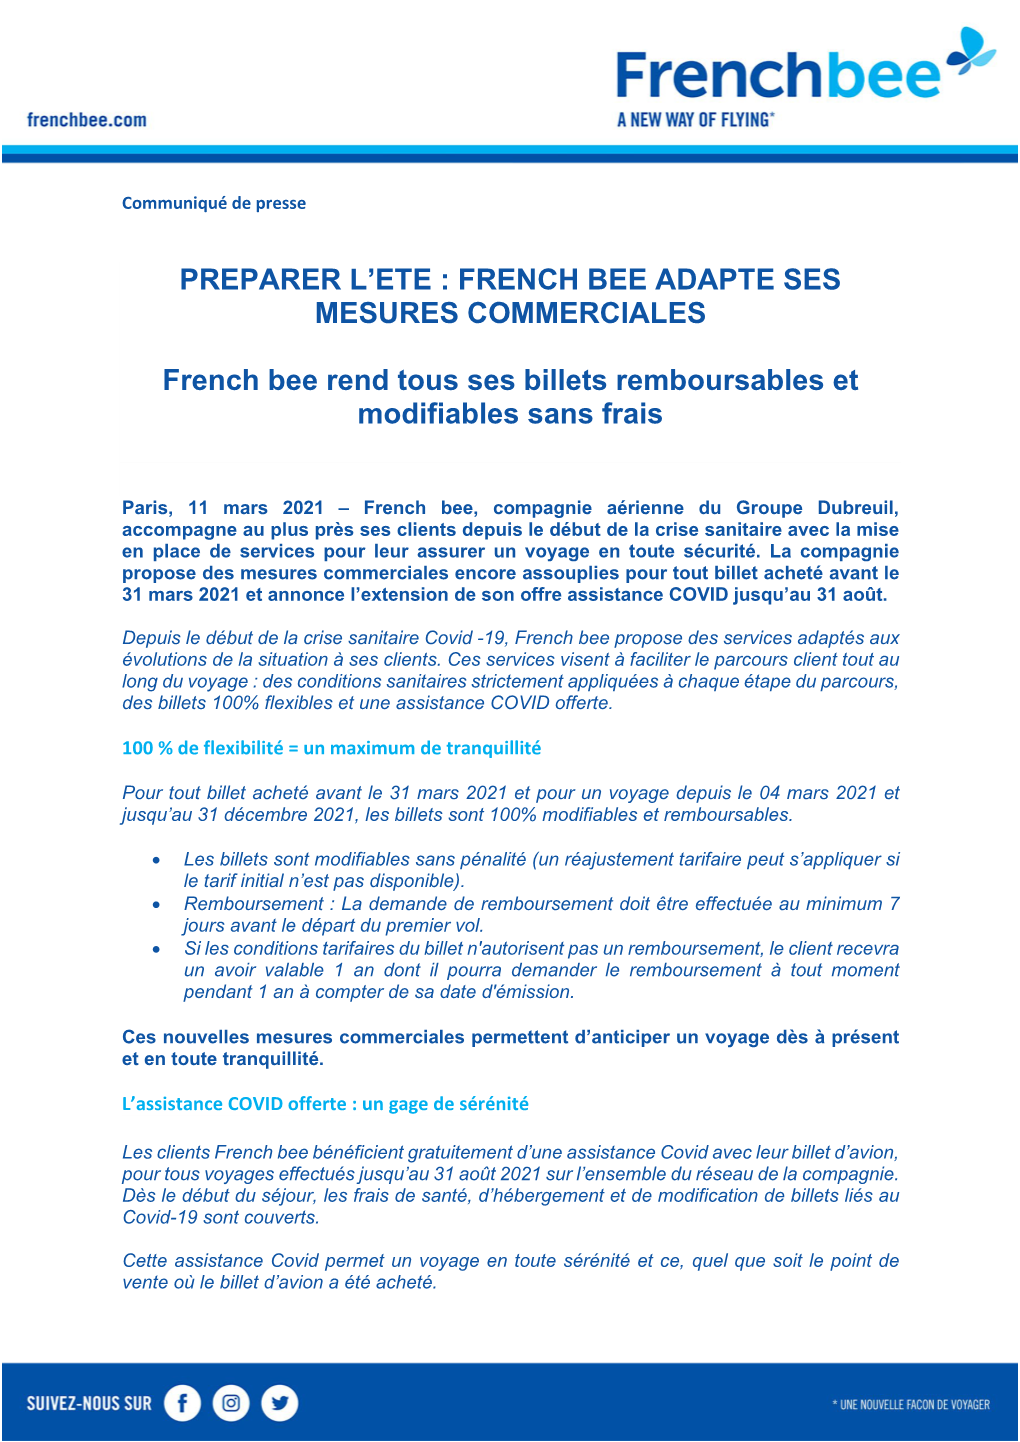 French Bee Adapte Ses Mesures Commerciales